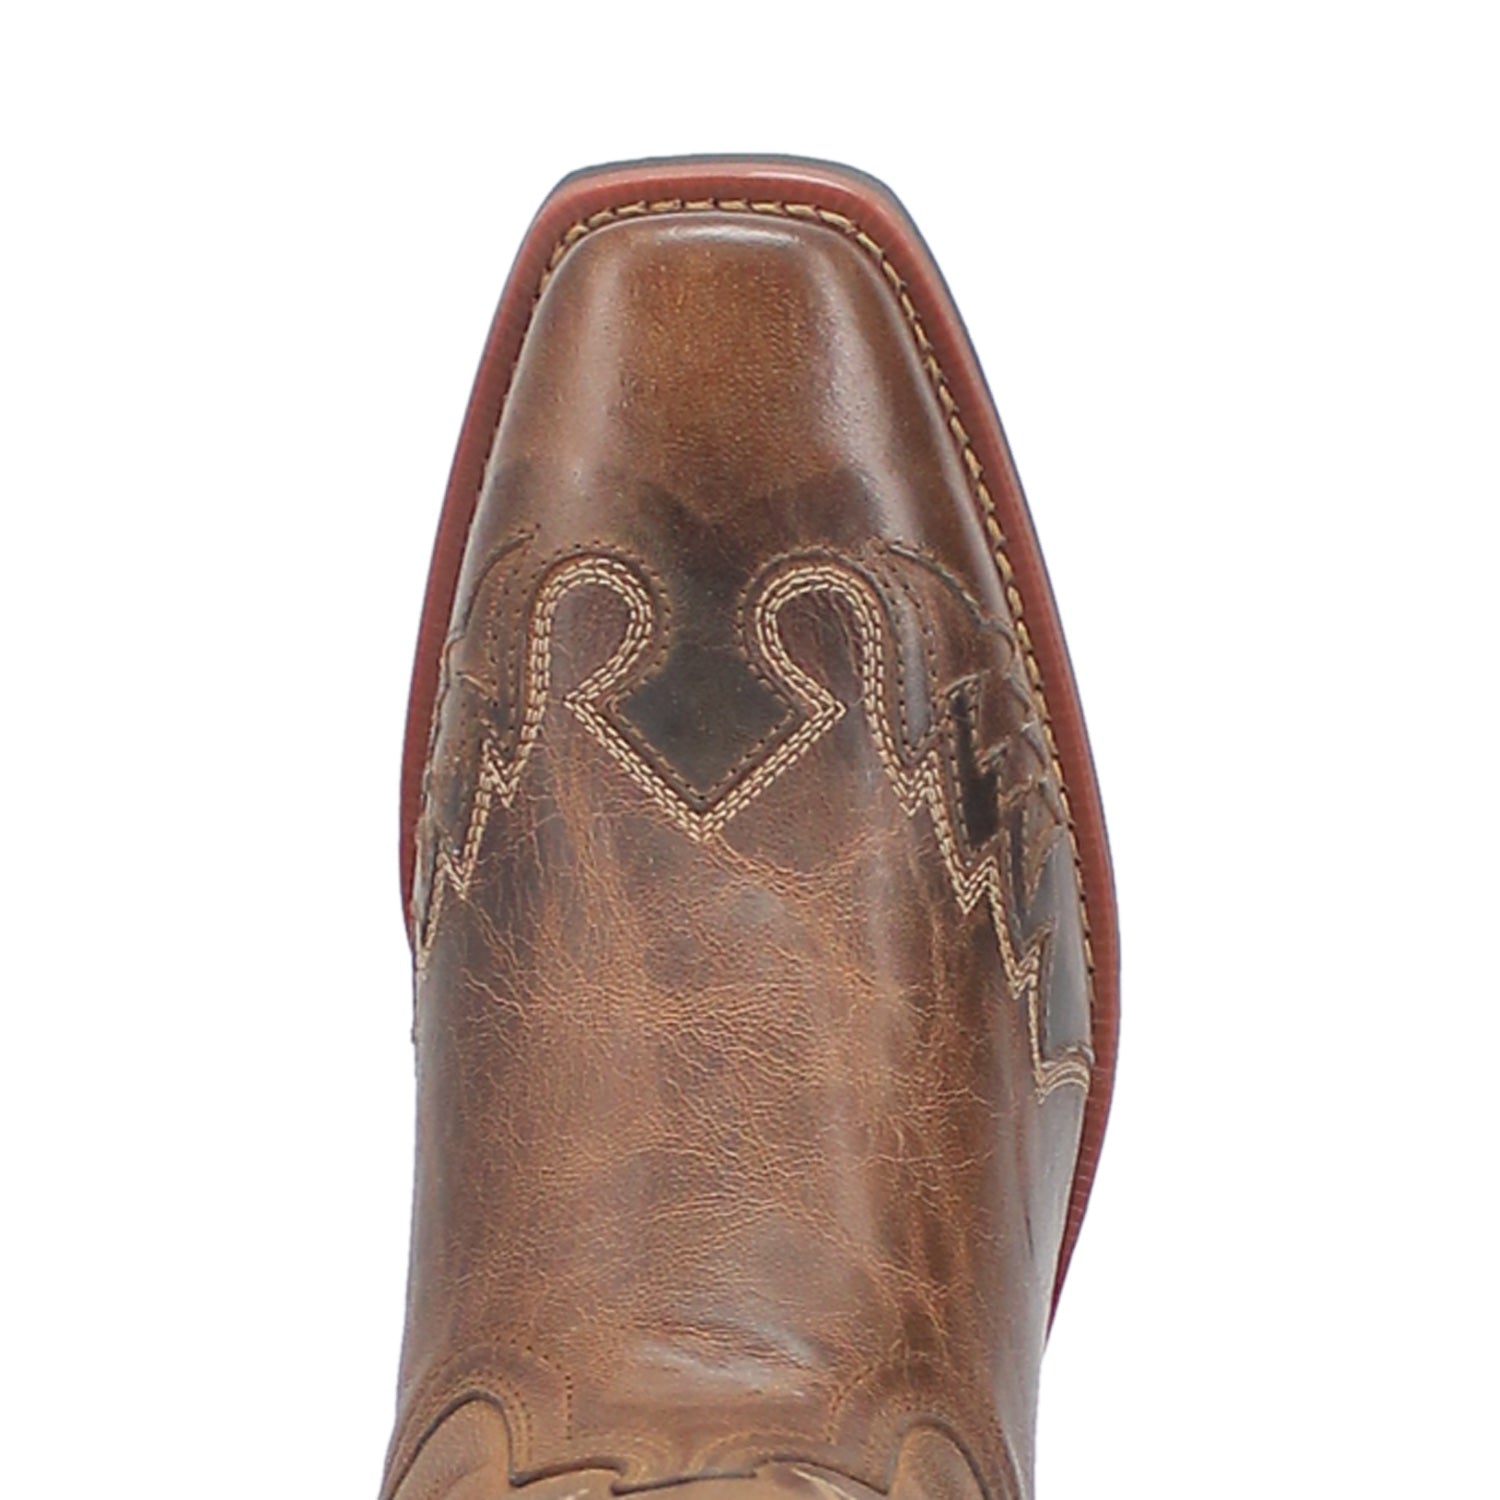 WILLIAMS LEATHER BOOT Image